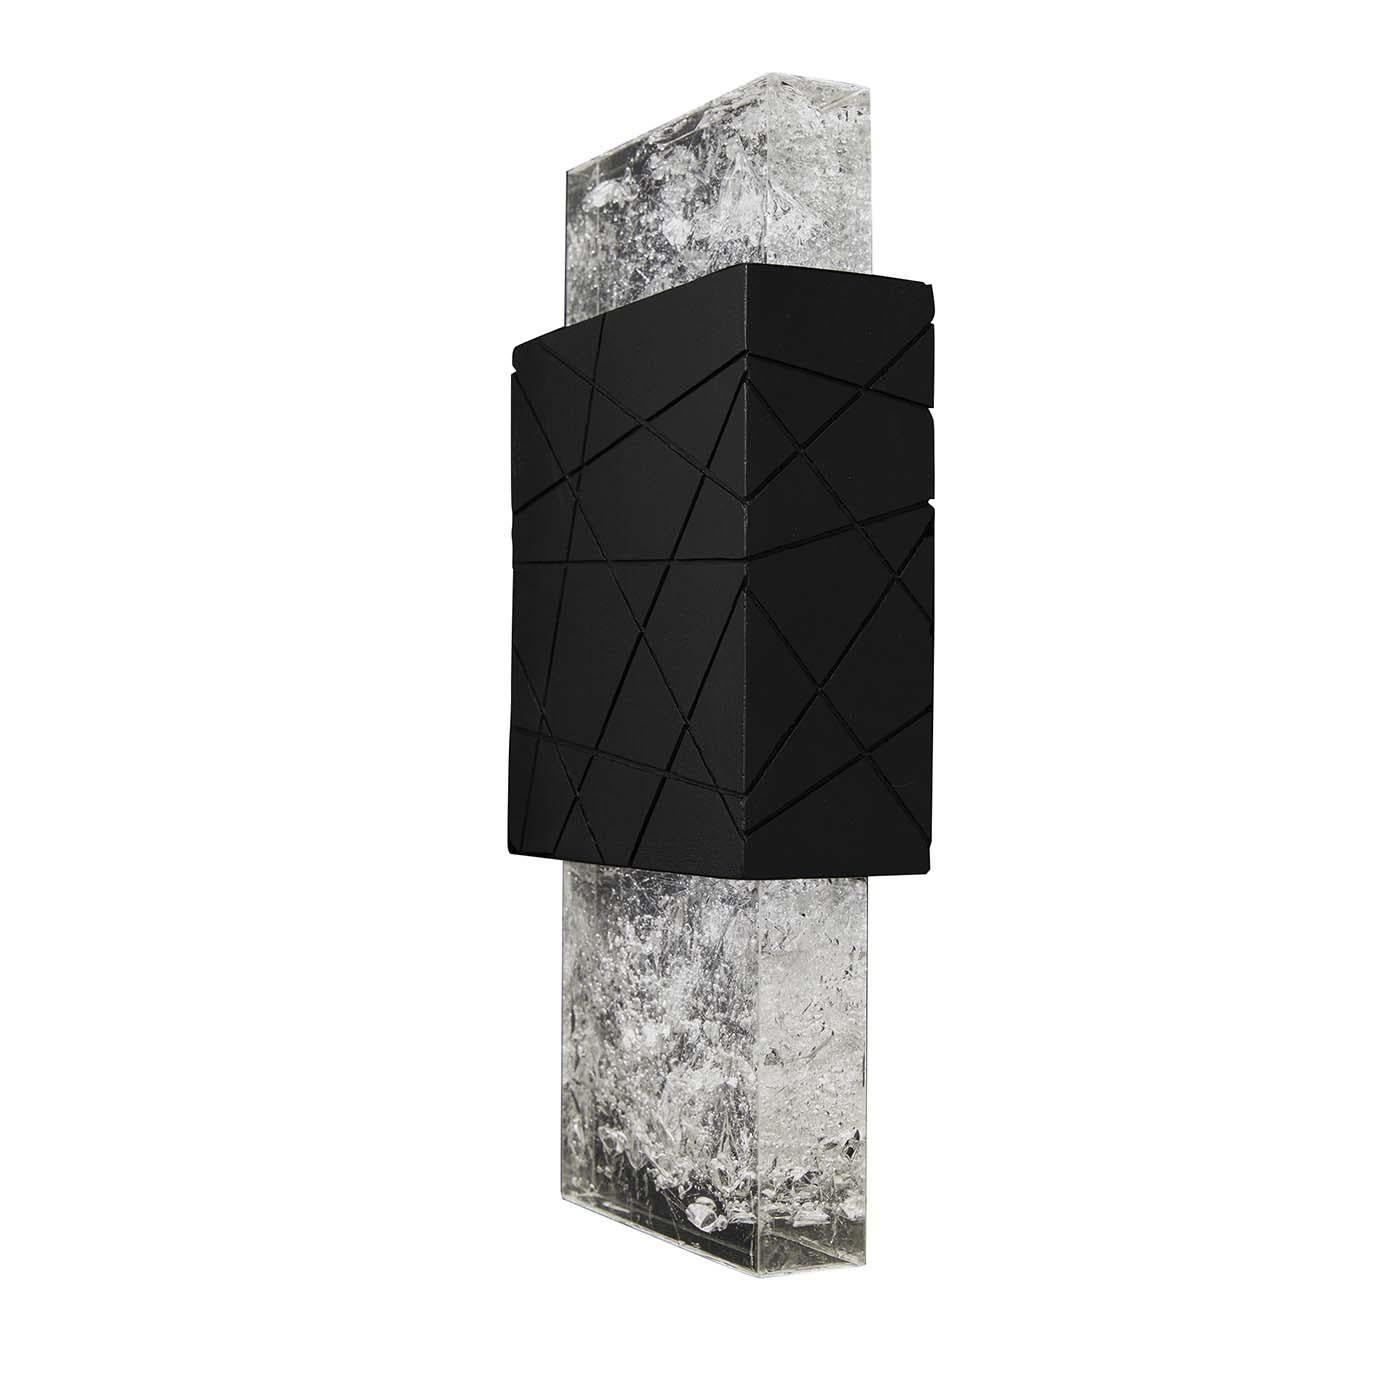 This exquisite wall lamp captures the unique features of the volcanic rock in an essential design suited for modern living interiors. Rich in textures and contrast, the irregular lines engraved on the black porous surface are obtained by applying